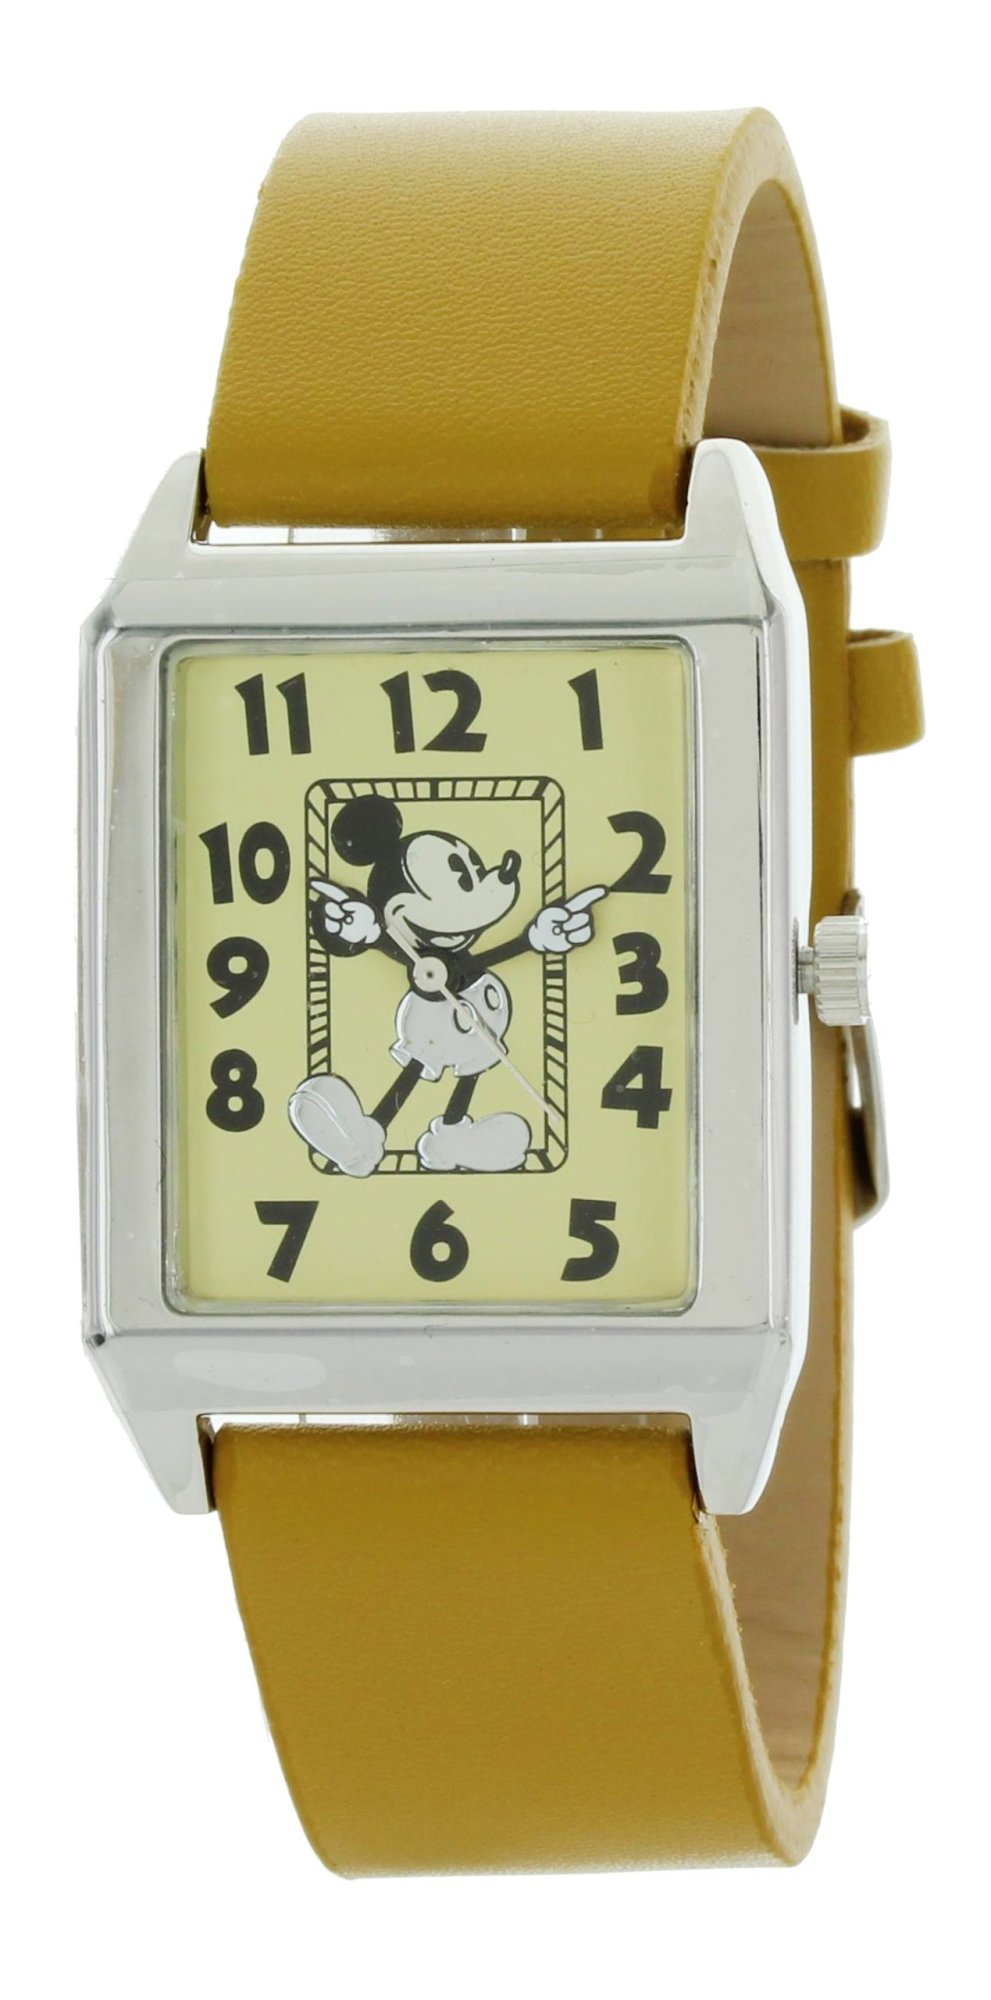 Model: Disney Mickey Mouse Rectangle Watch with Leather Band